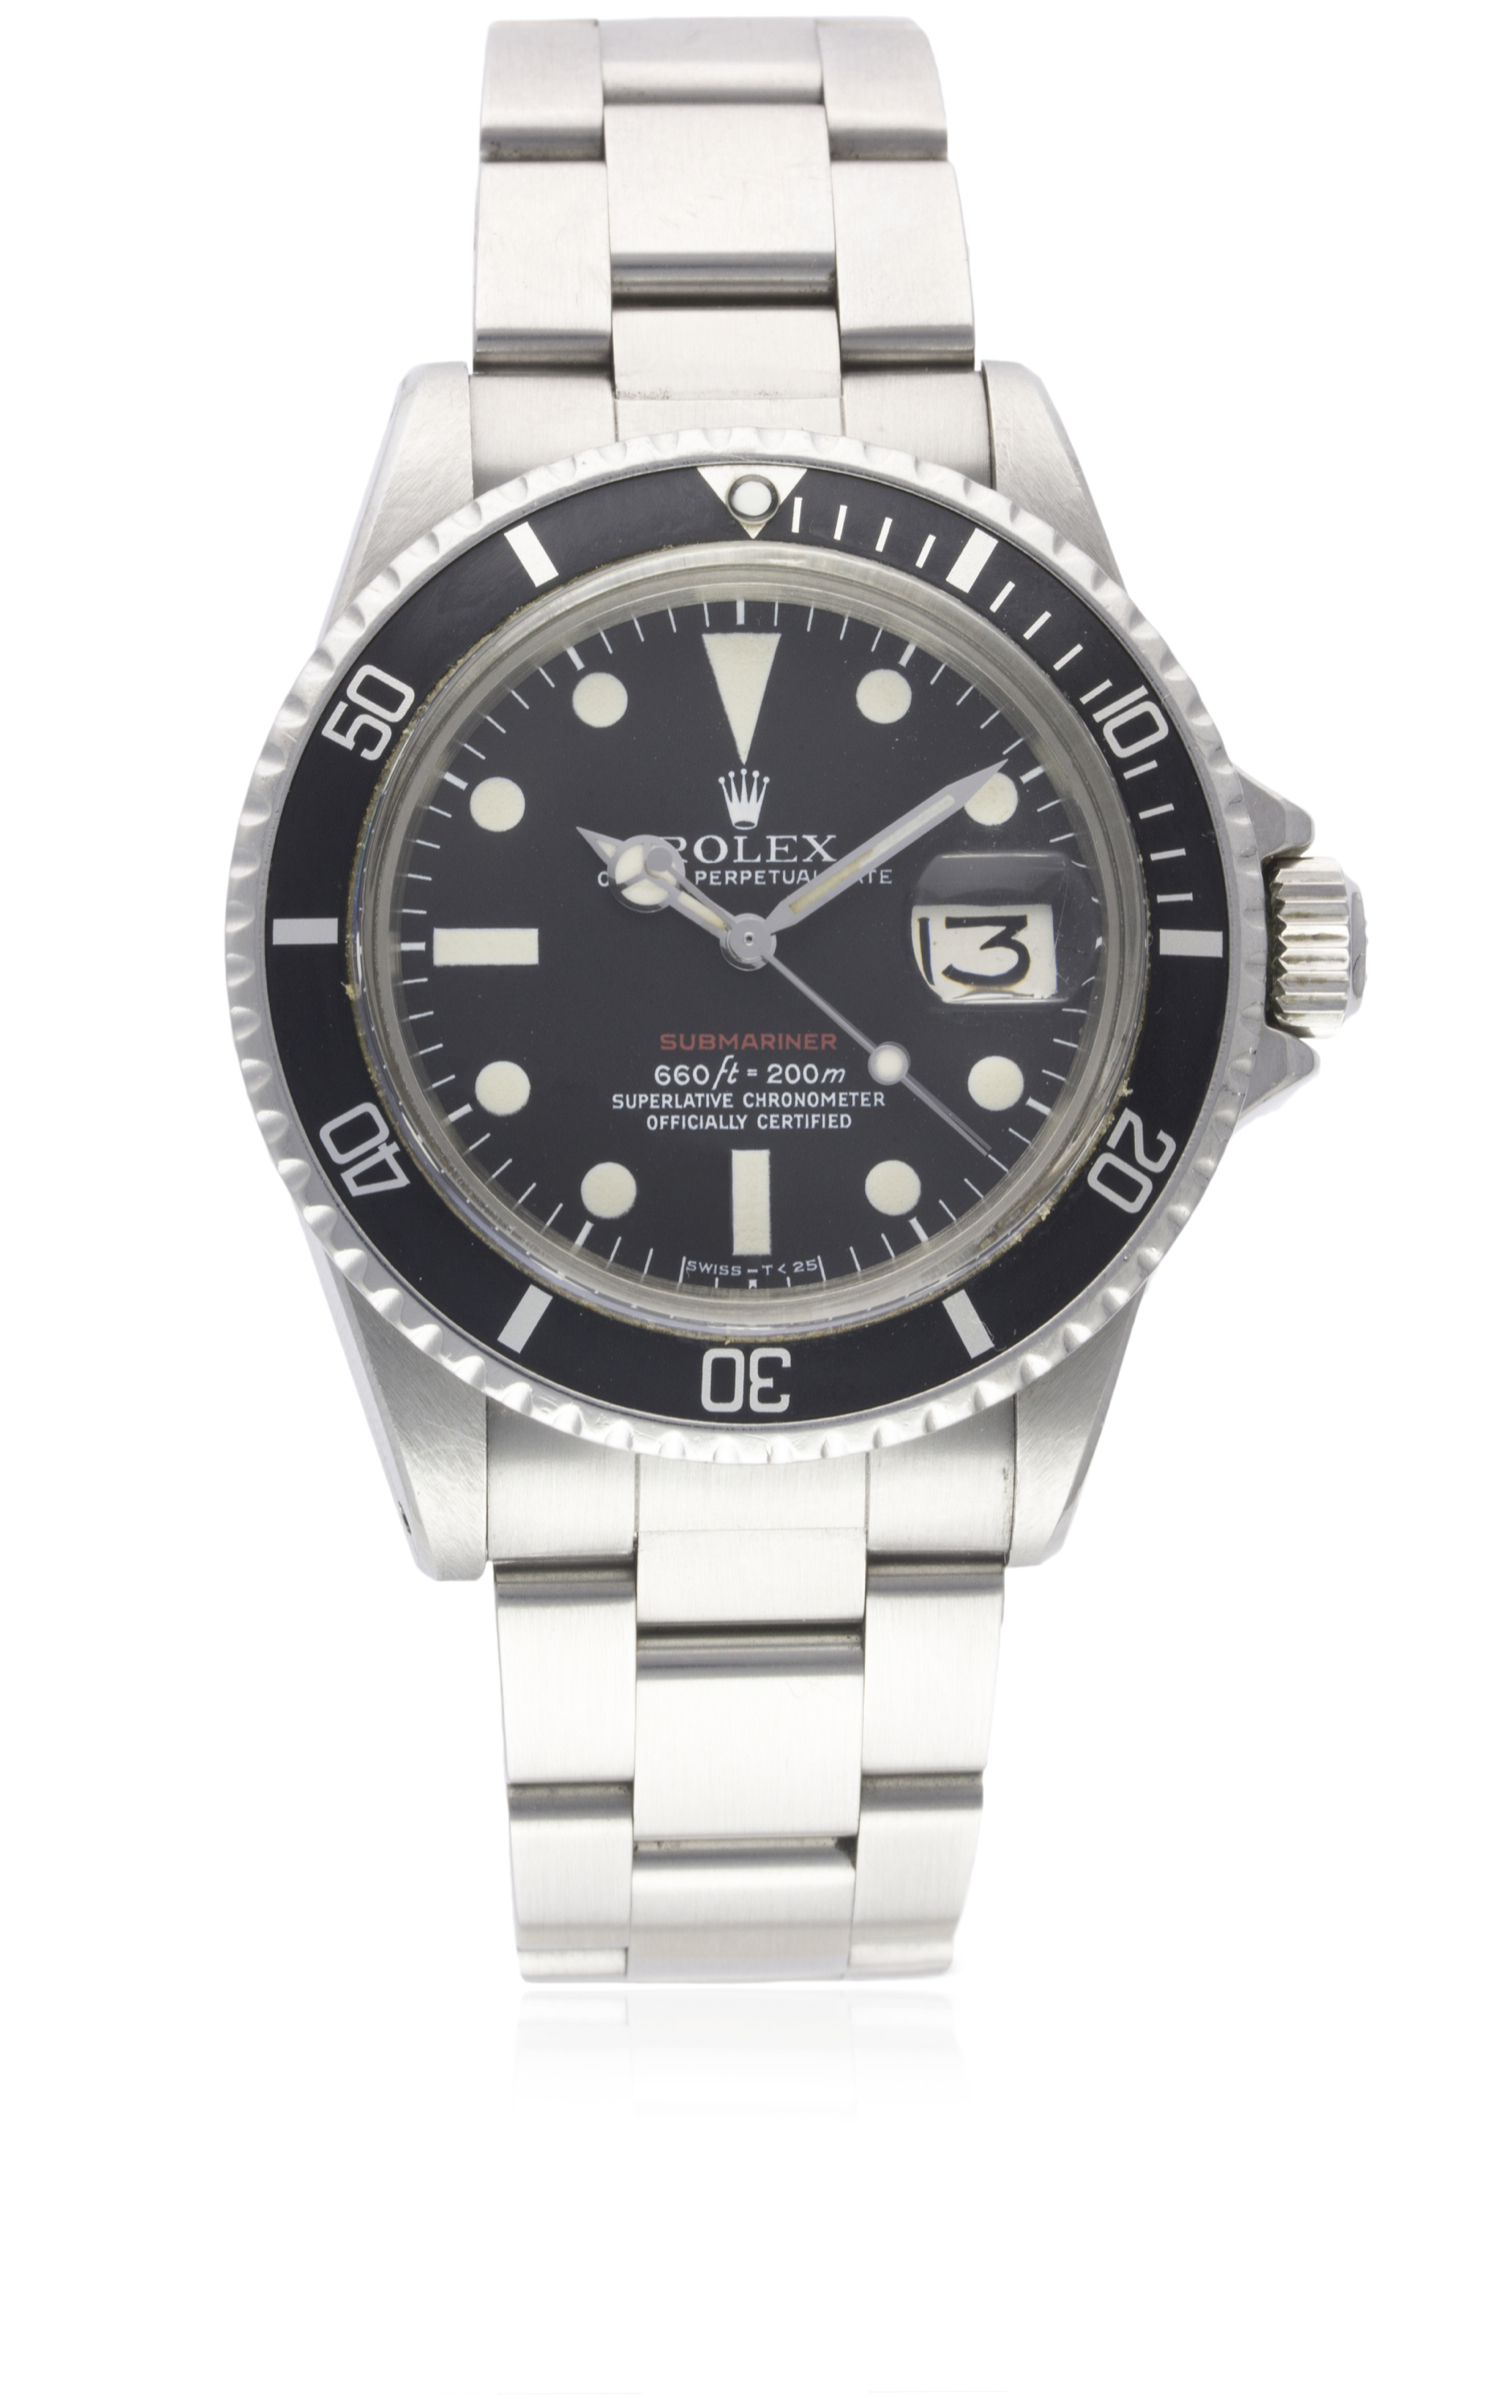 A RARE GENTLEMAN'S STAINLESS STEEL ROLEX OYSTER PERPETUAL DATE "RED WRITING" SUBMARINER BRACELET - Image 2 of 11